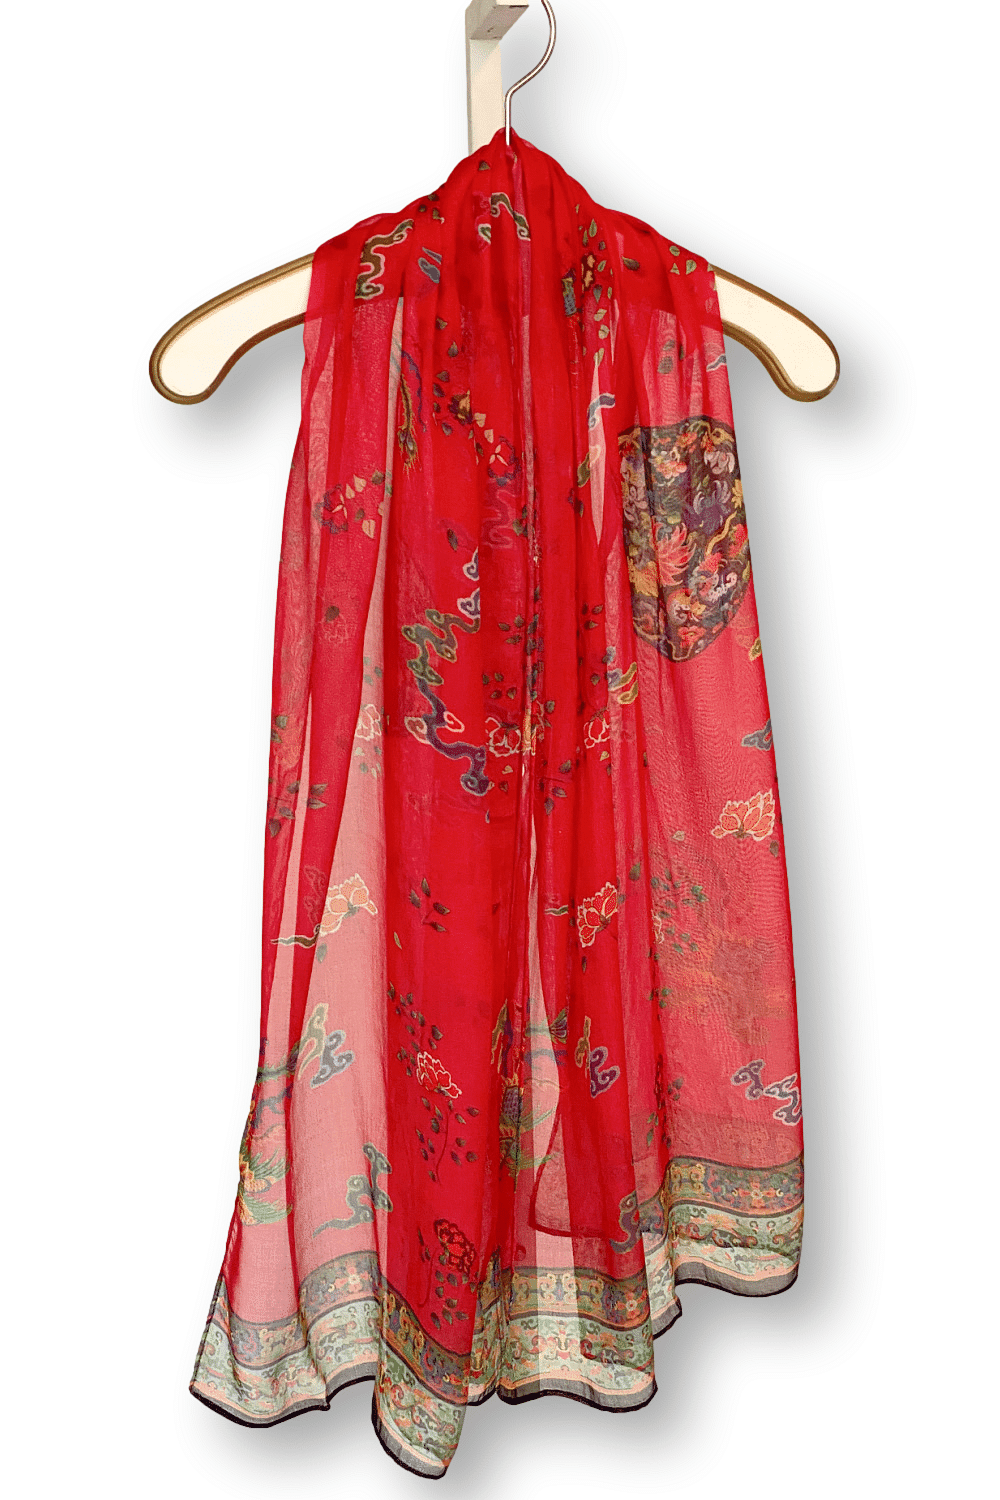 Lightweigh sheer red scarf with an asian influence print and boarder design. It is draped over an antique creme hanger with gold trim.